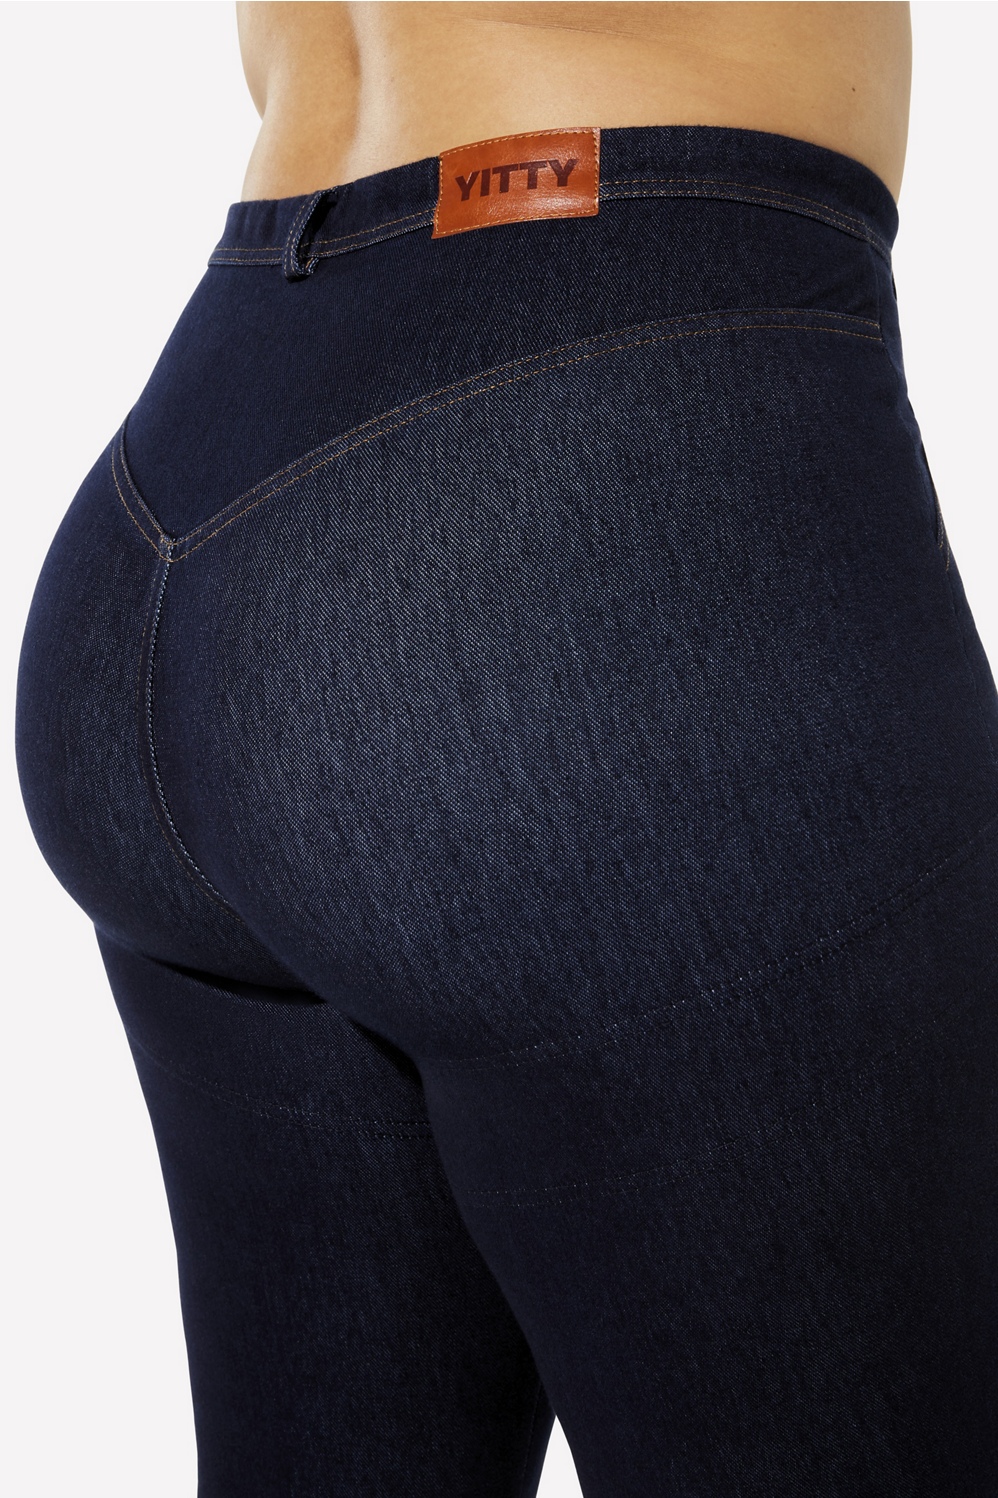 Is Stretch Denim Served Jean Smoothing - Yitty